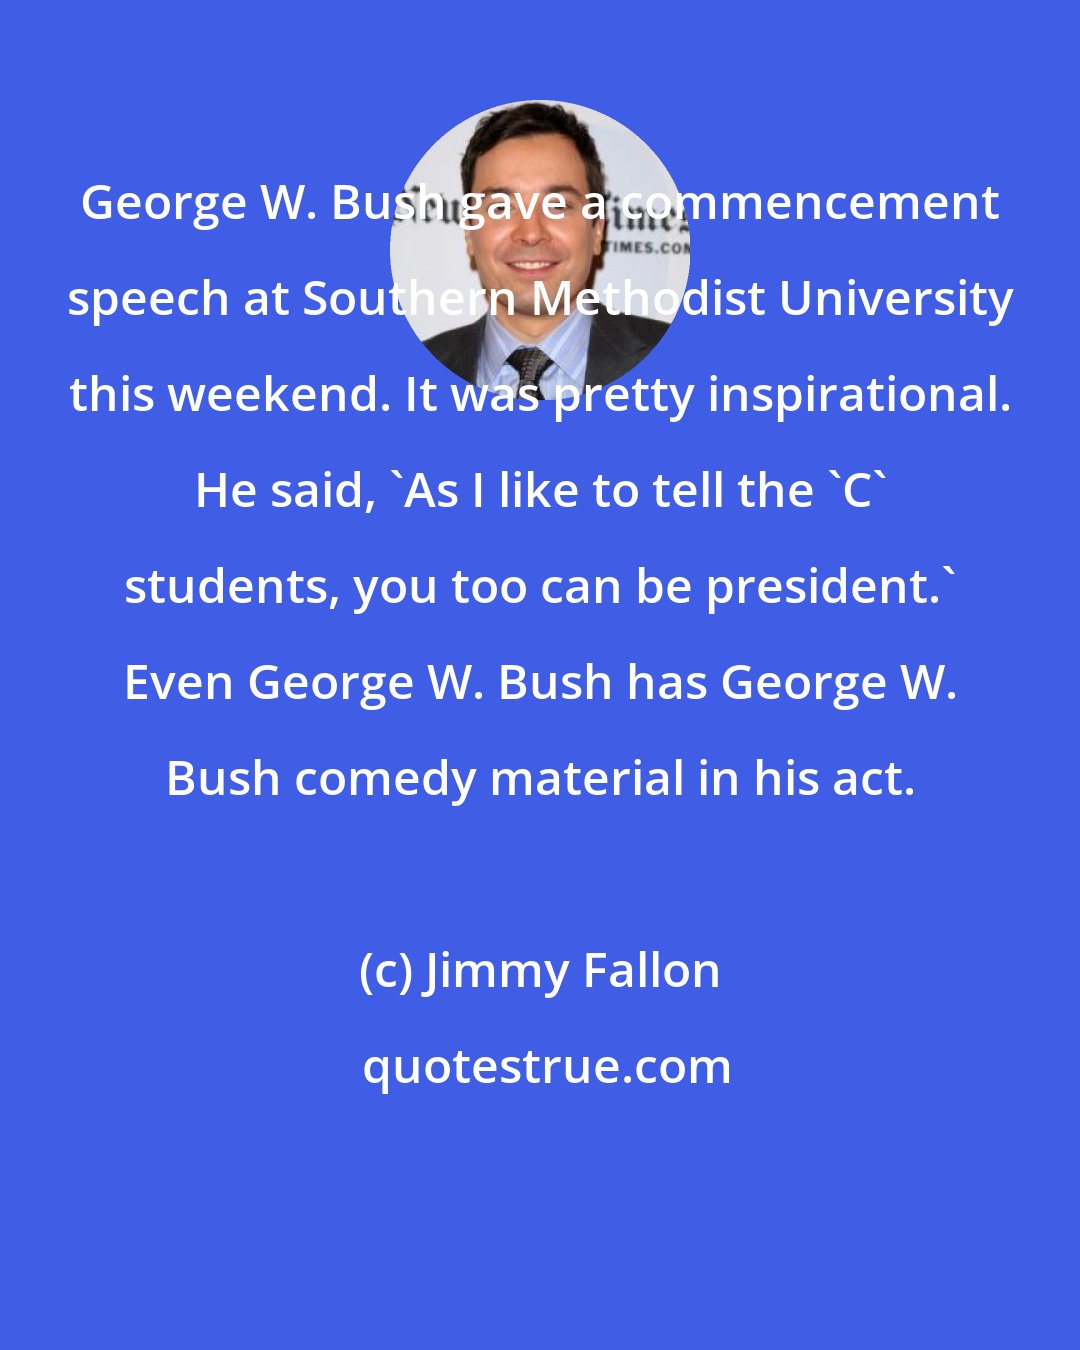 Jimmy Fallon: George W. Bush gave a commencement speech at Southern Methodist University this weekend. It was pretty inspirational. He said, 'As I like to tell the 'C' students, you too can be president.' Even George W. Bush has George W. Bush comedy material in his act.